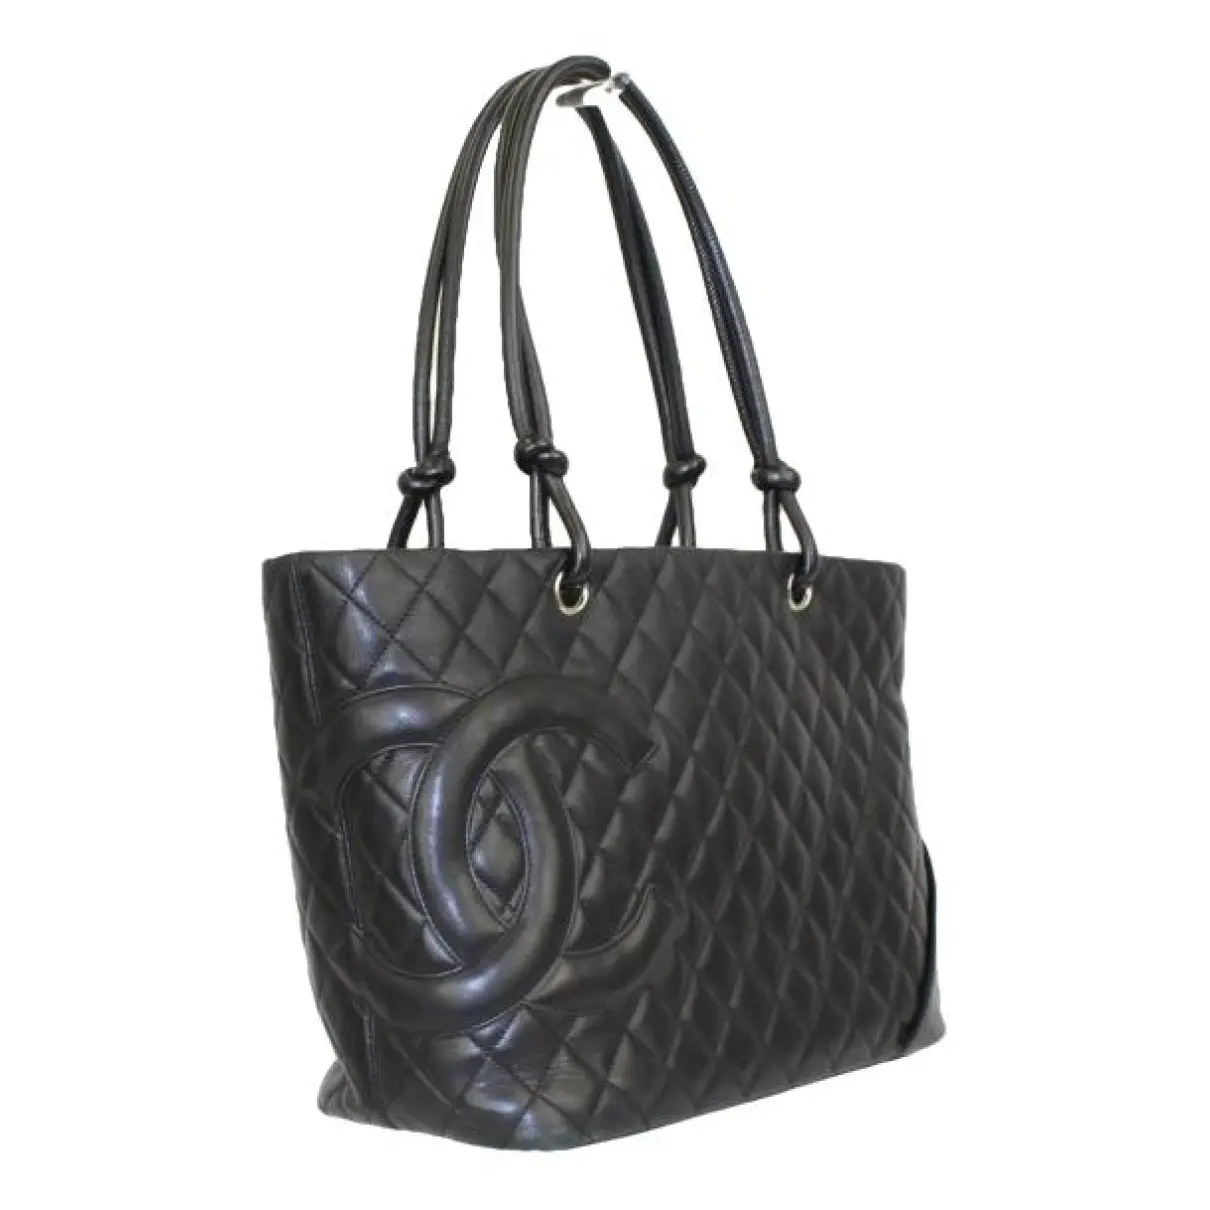 Cambon leather handbag Chanel Black in Leather - 39005351